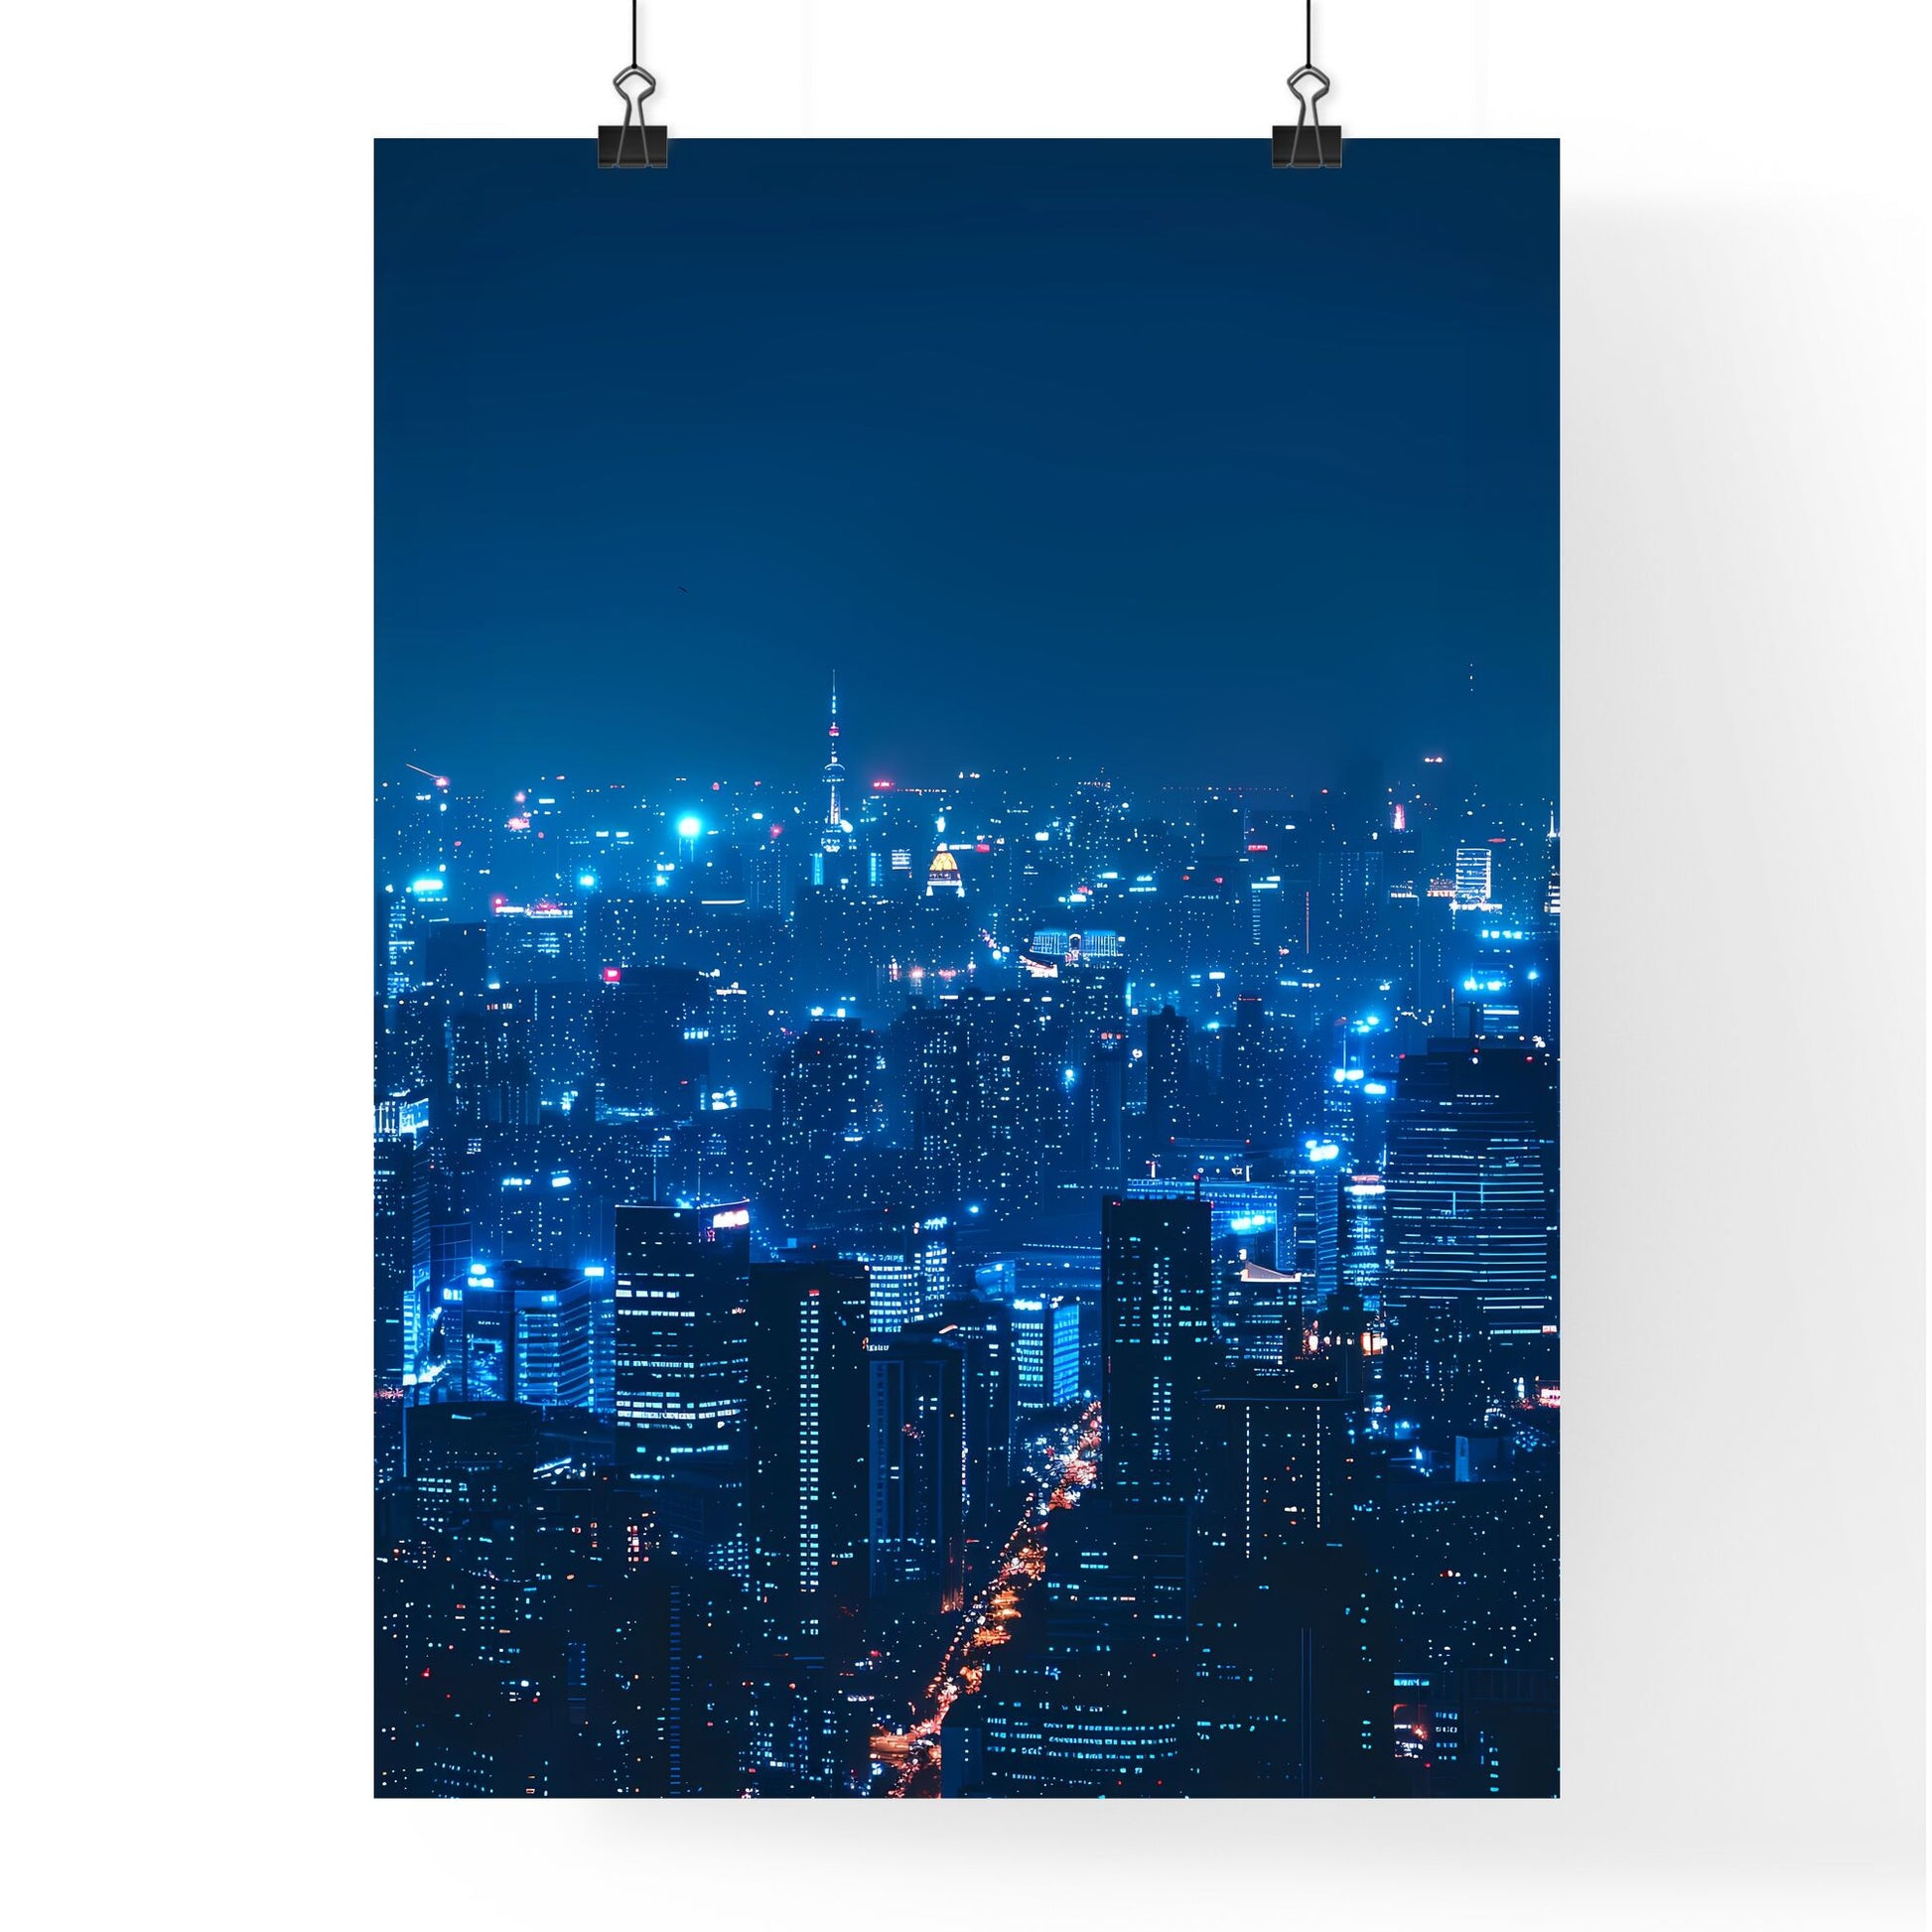 Minimalist Night Metropolis Panorama with Illuminated Skyscrapers in Blue and White X-ray Style on Black Background, Smart City, 32K, Shanghai Default Title